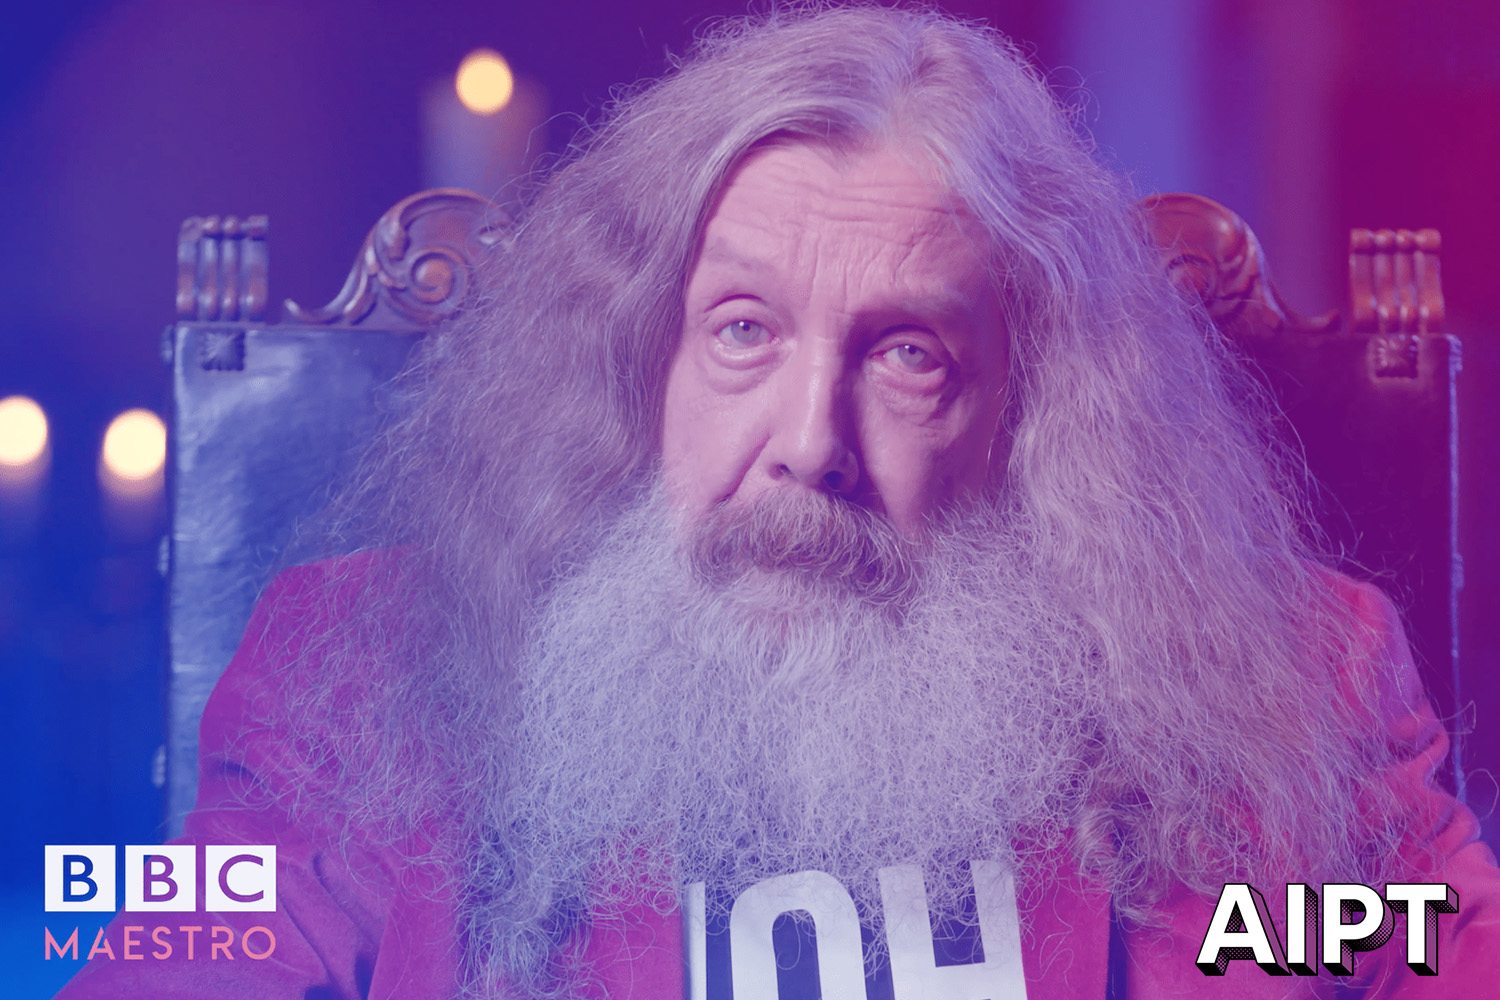 EXCLUSIVE: Alan Moore details his 3 favorite words to bring into conversation